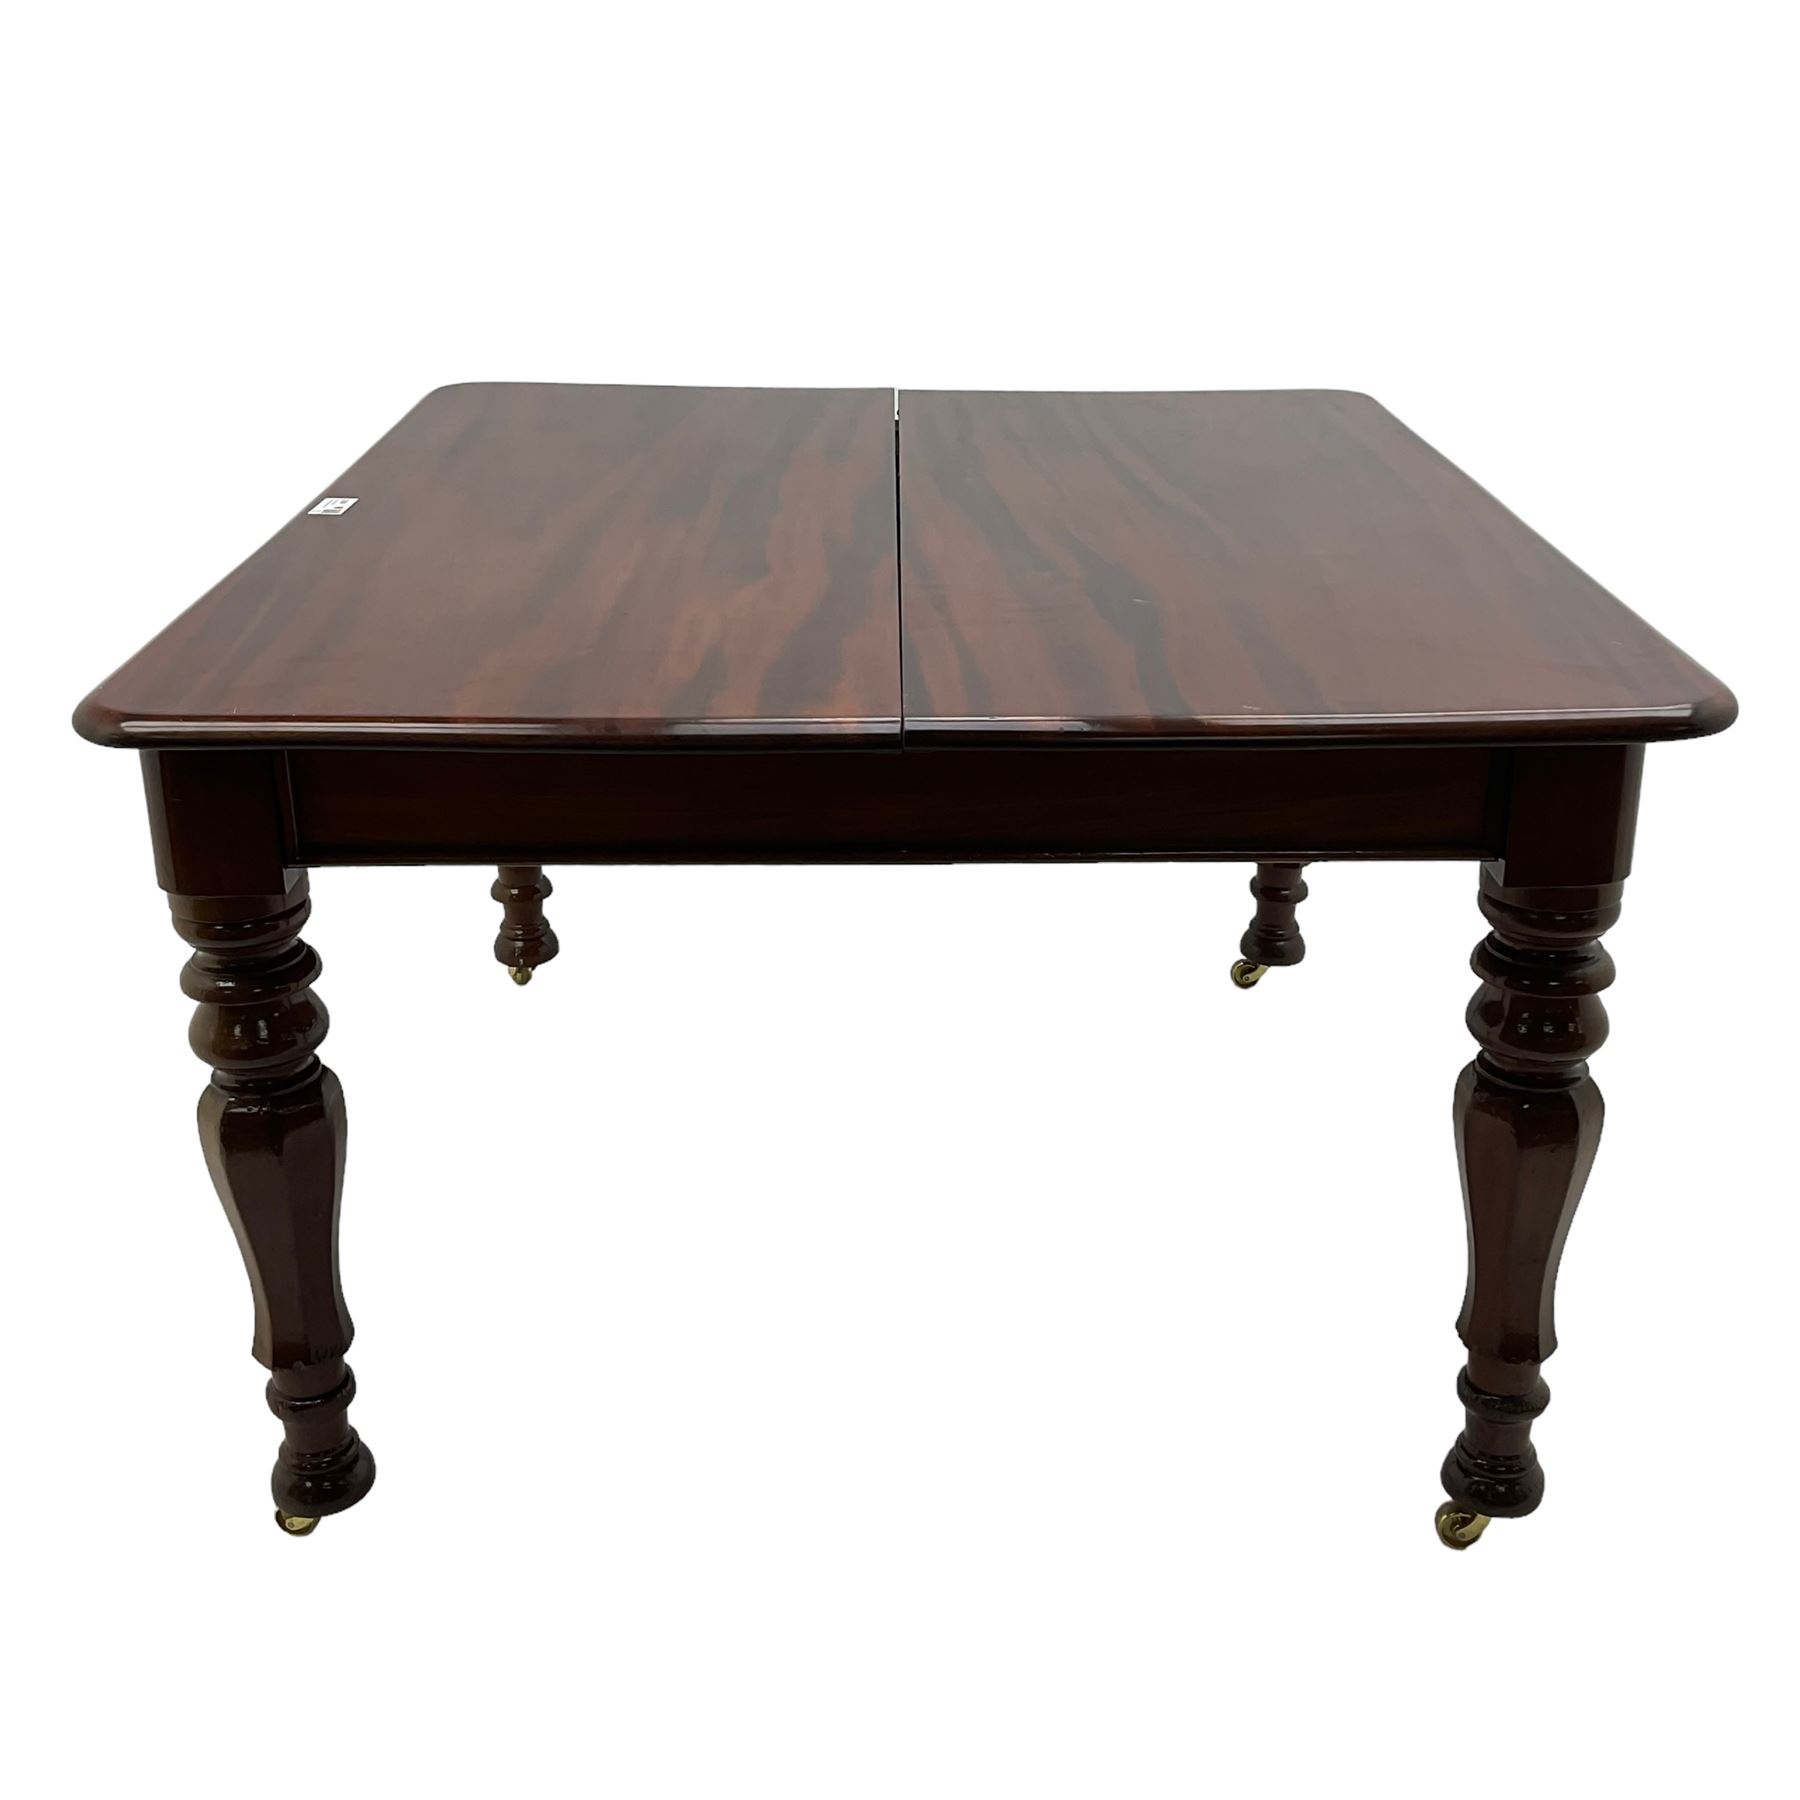 19th century mahogany extending dining table with three additional leaves - Image 8 of 15